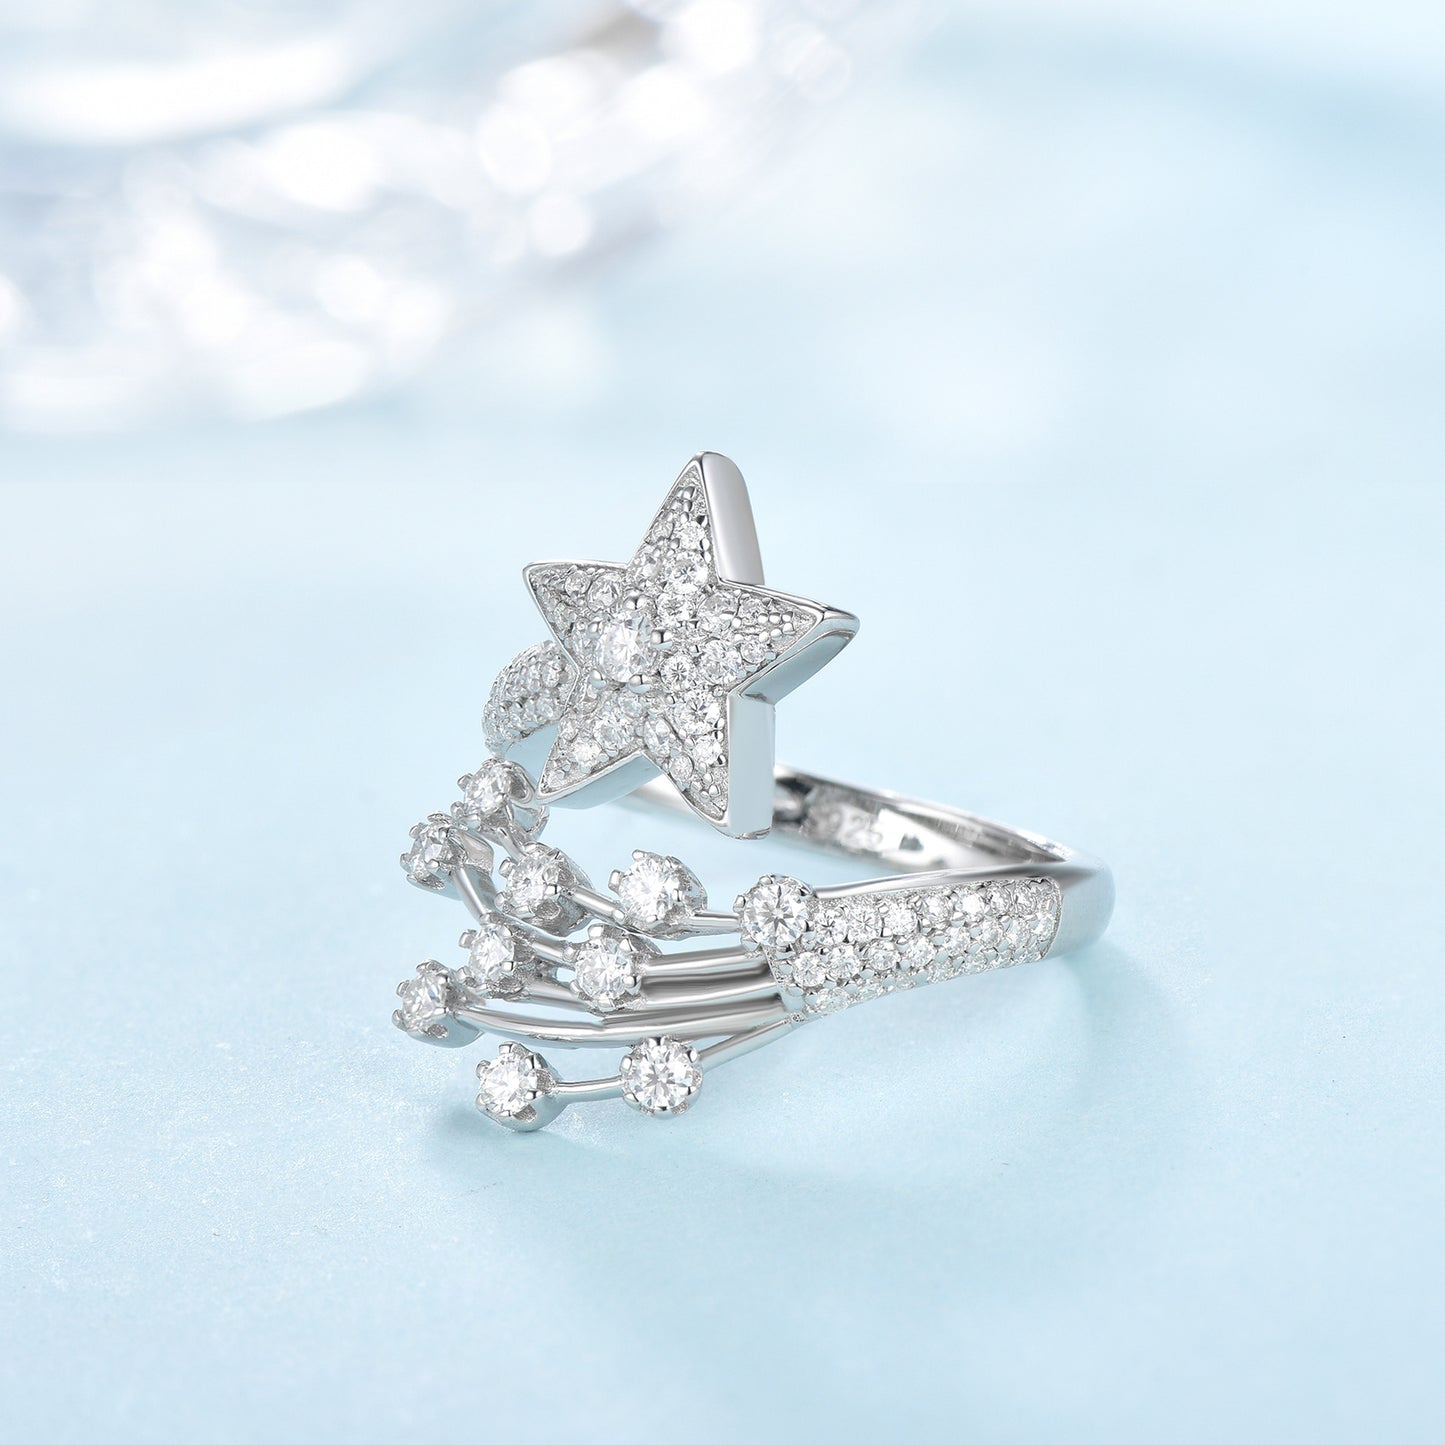 Haute couture jewelry niche design comet full diamond moissanite sterling silver five-pointed star ring open ring women